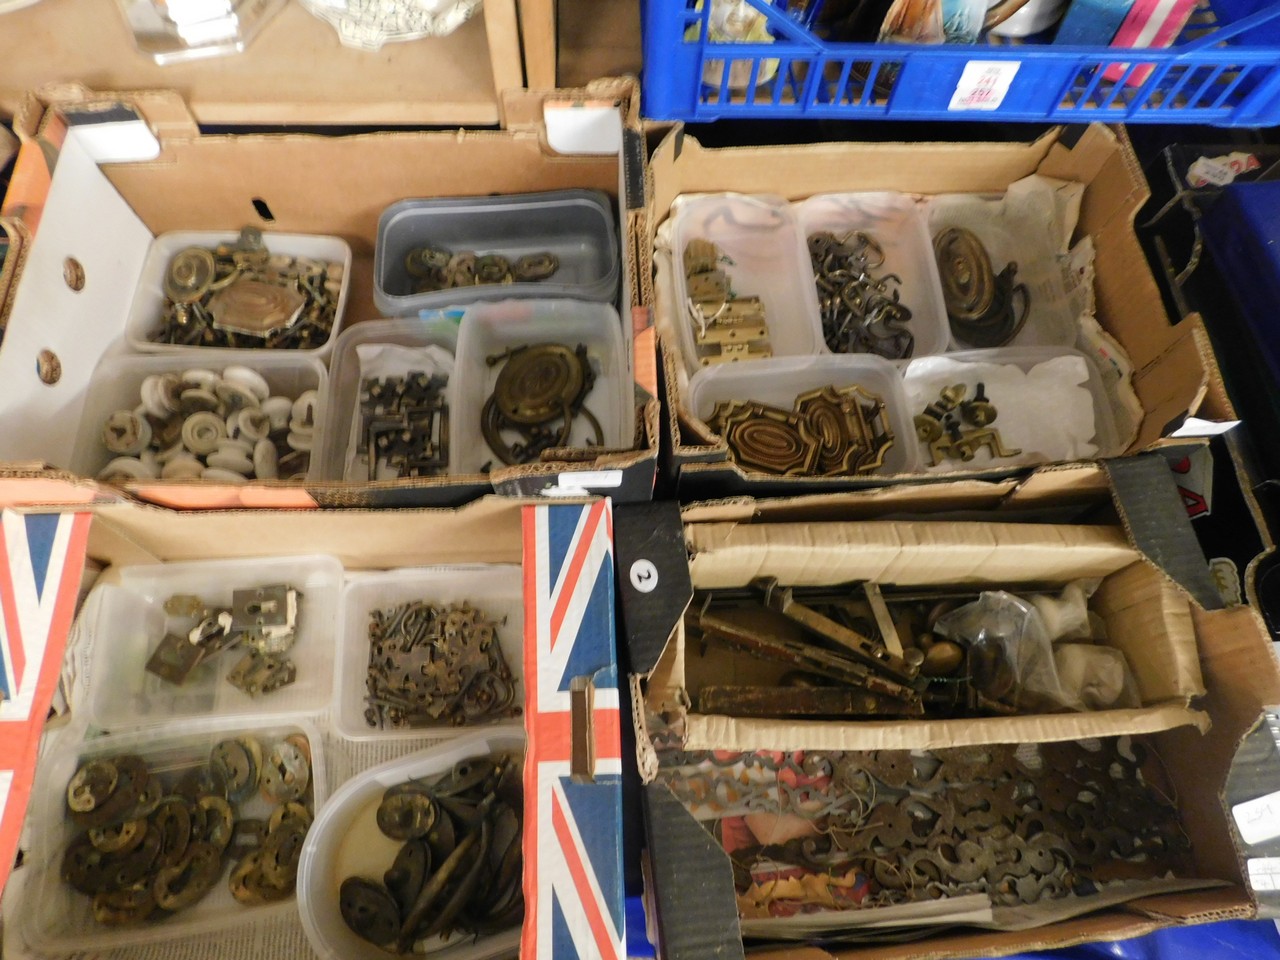 FOUR BOXES OF MIXED FURNITURE FITTINGS, ESCUTCHEONS, DOOR KNOBS, HANDLES, HINGES ETC